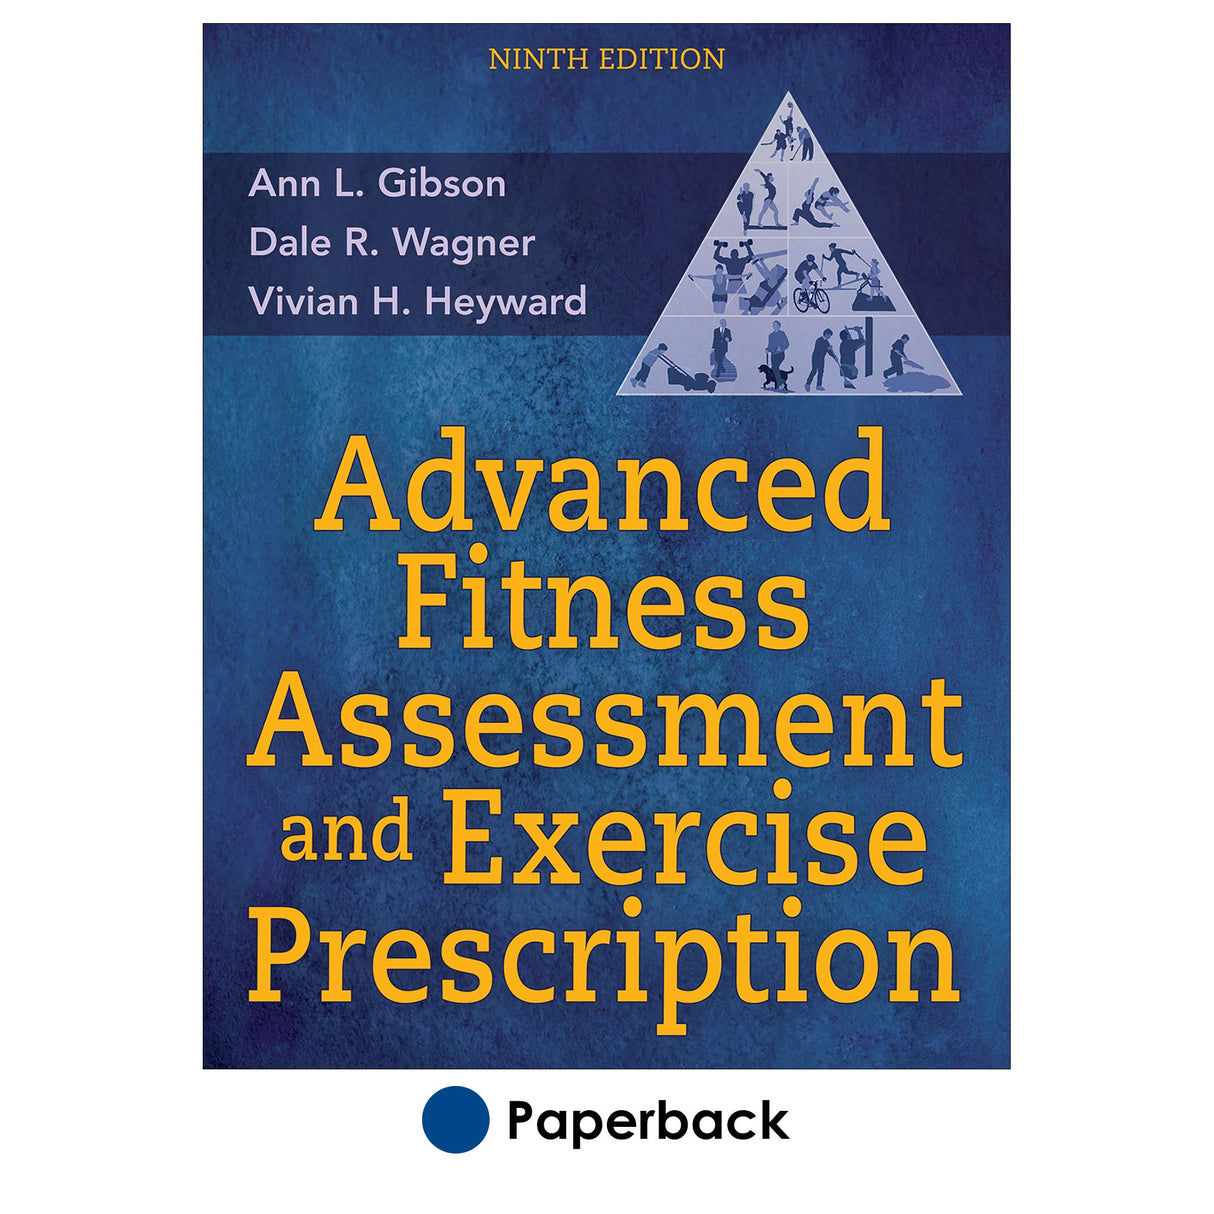 Advanced Fitness Assessment and Exercise Prescription 9th Edition With HKPropel Online Video